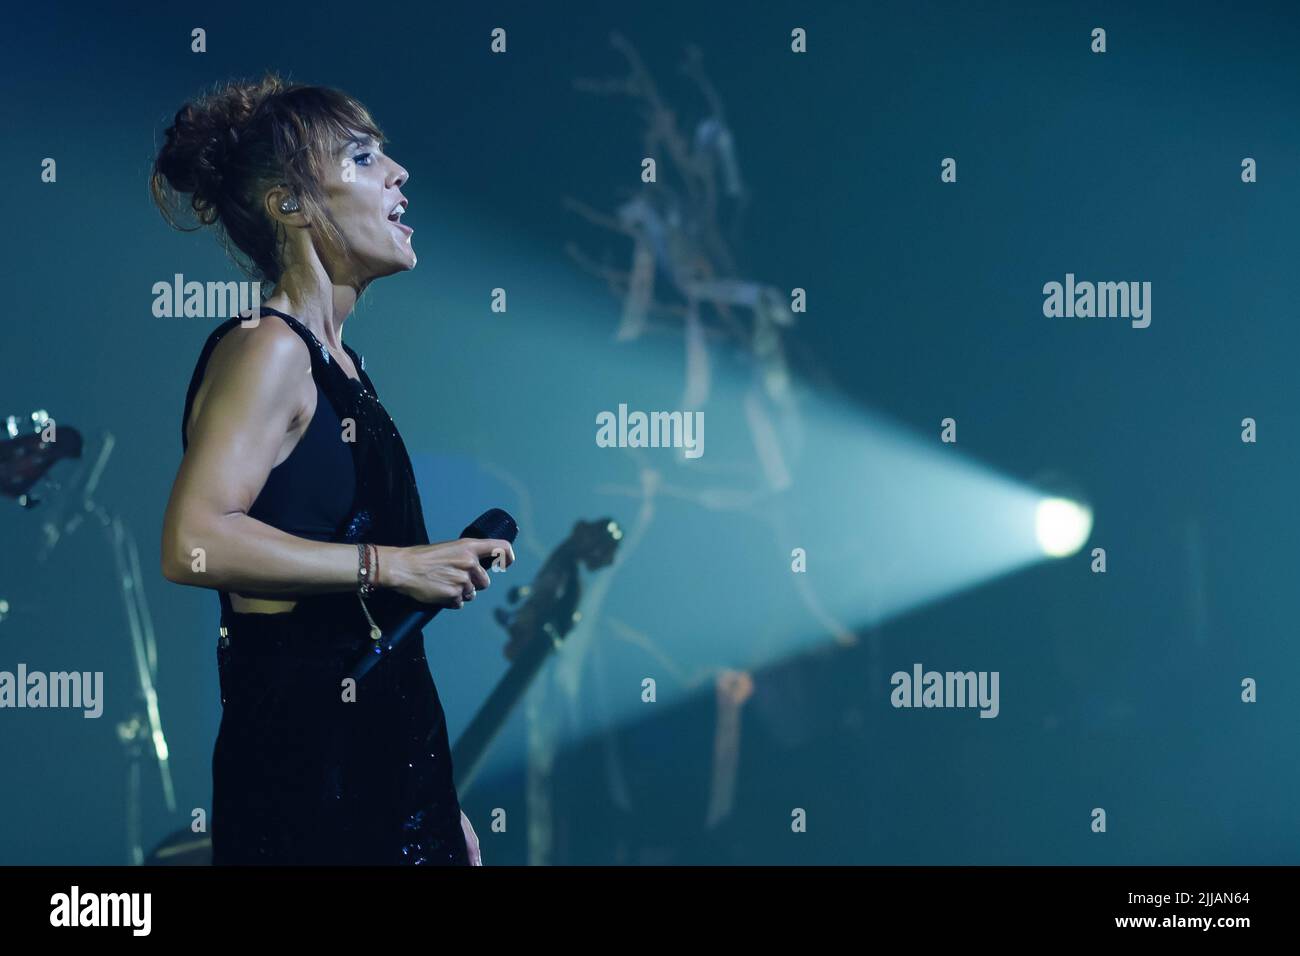 Madrid, Spain. 24th July, 2022. The French singer-songwriter Isabelle Geffroy, known by her stage name Zaz, performs during the concert at the Teatro Real in Madrid where she has shown her fusion of French song with gypsy jazz, within the tour 'Organique Tour' in Madrid. (Photo by Atilano Garcia/SOPA Images/Sipa USA) Credit: Sipa USA/Alamy Live News Stock Photo